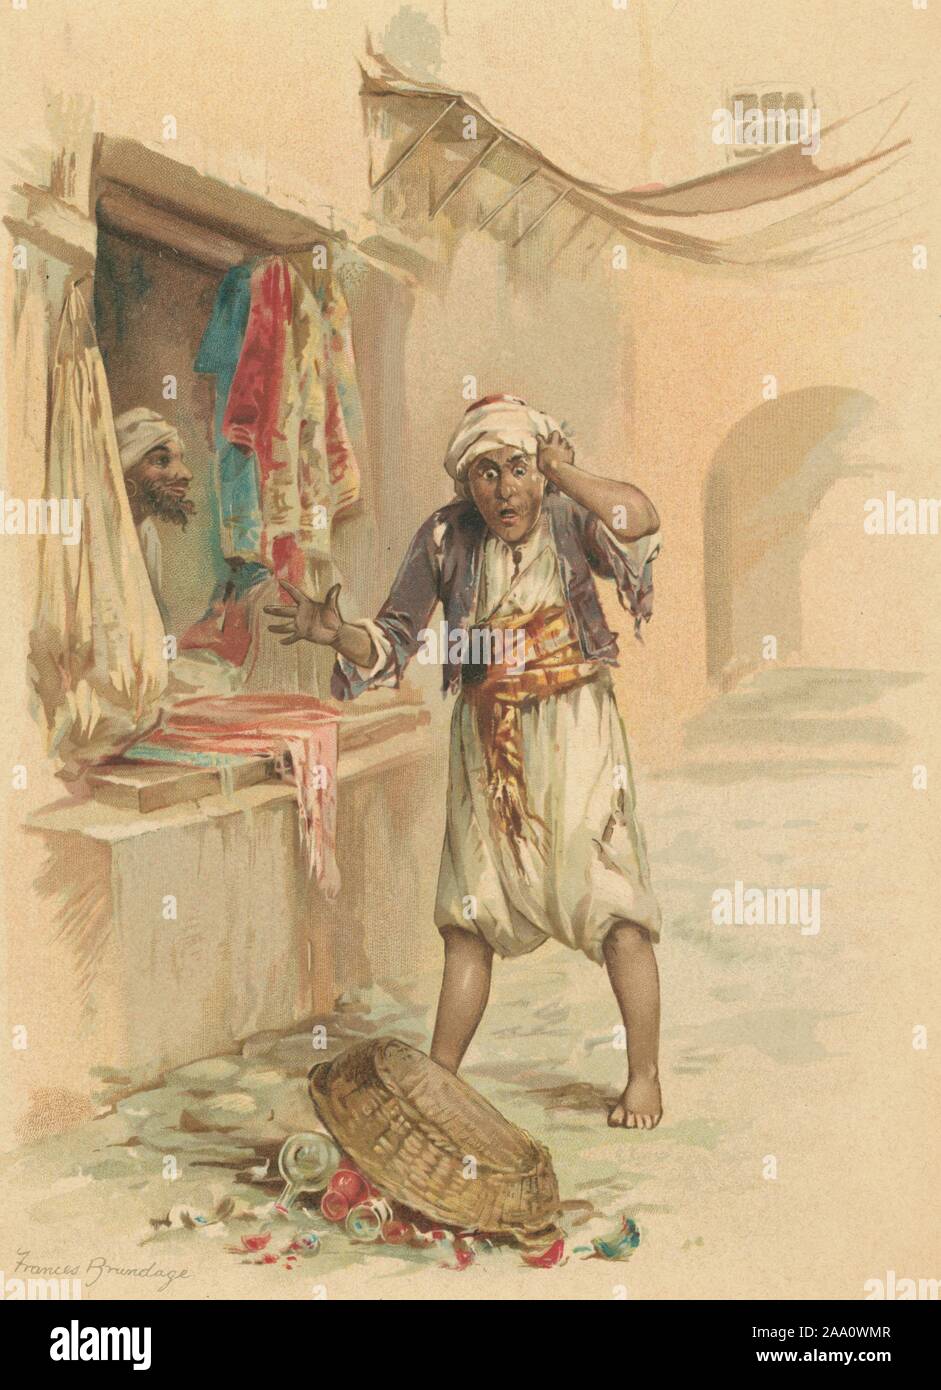 Illustration of a scene from the book 'The Arabian Nights', featuring Alnaschar standing in the street in front of his shop looking in shock at a basket of broken bottles and jars, illustrated by Frances Brundage, published by Raphael Tuck and Sons, 1894. From the New York Public Library. () Stock Photo